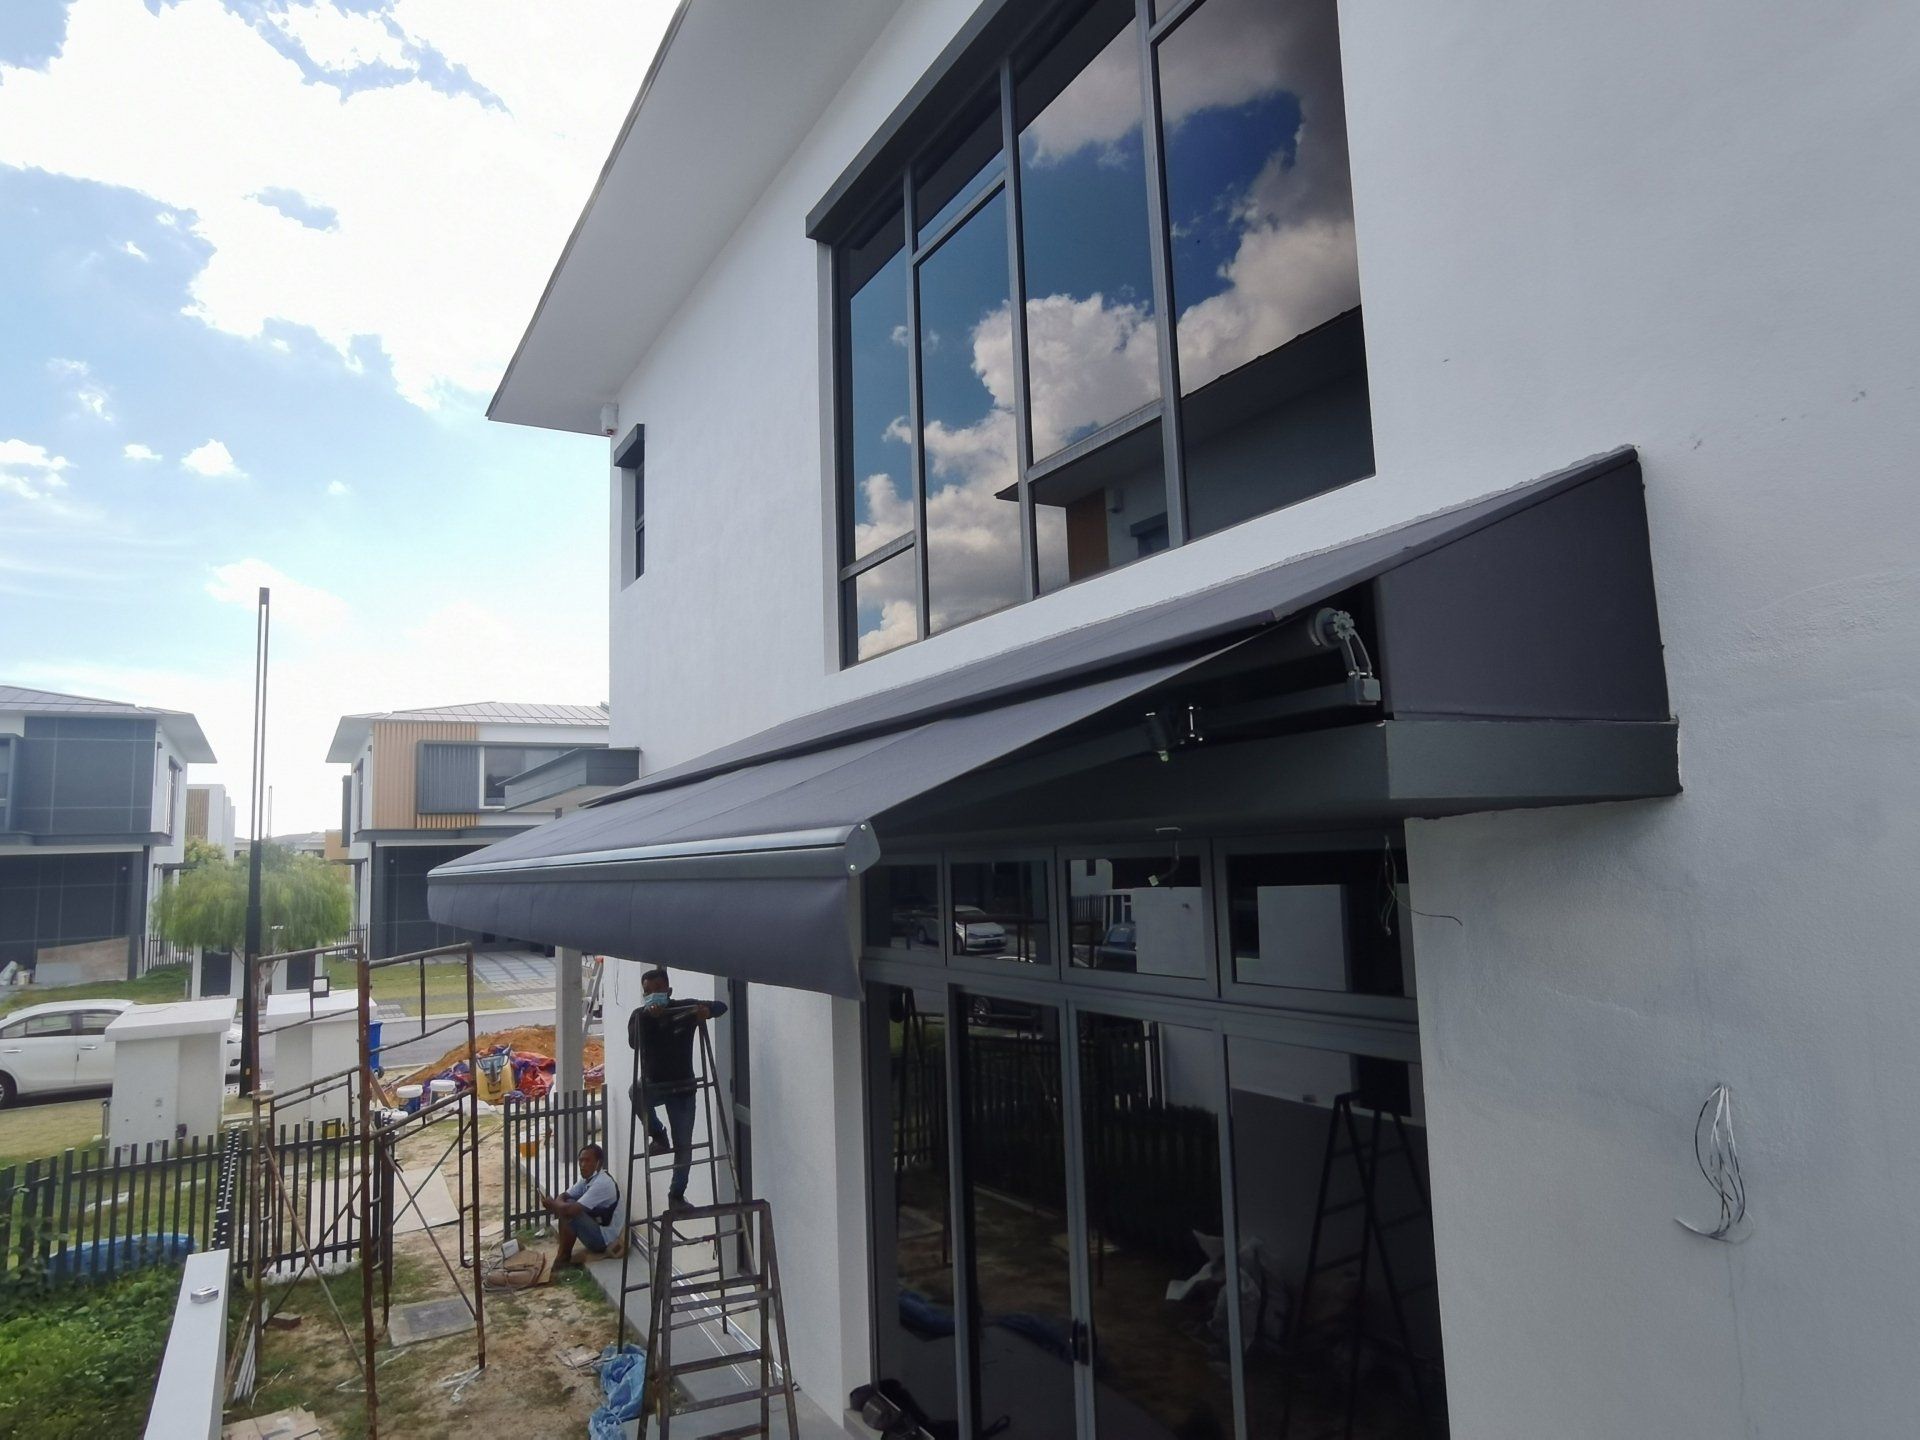 Retractable Awning Installation